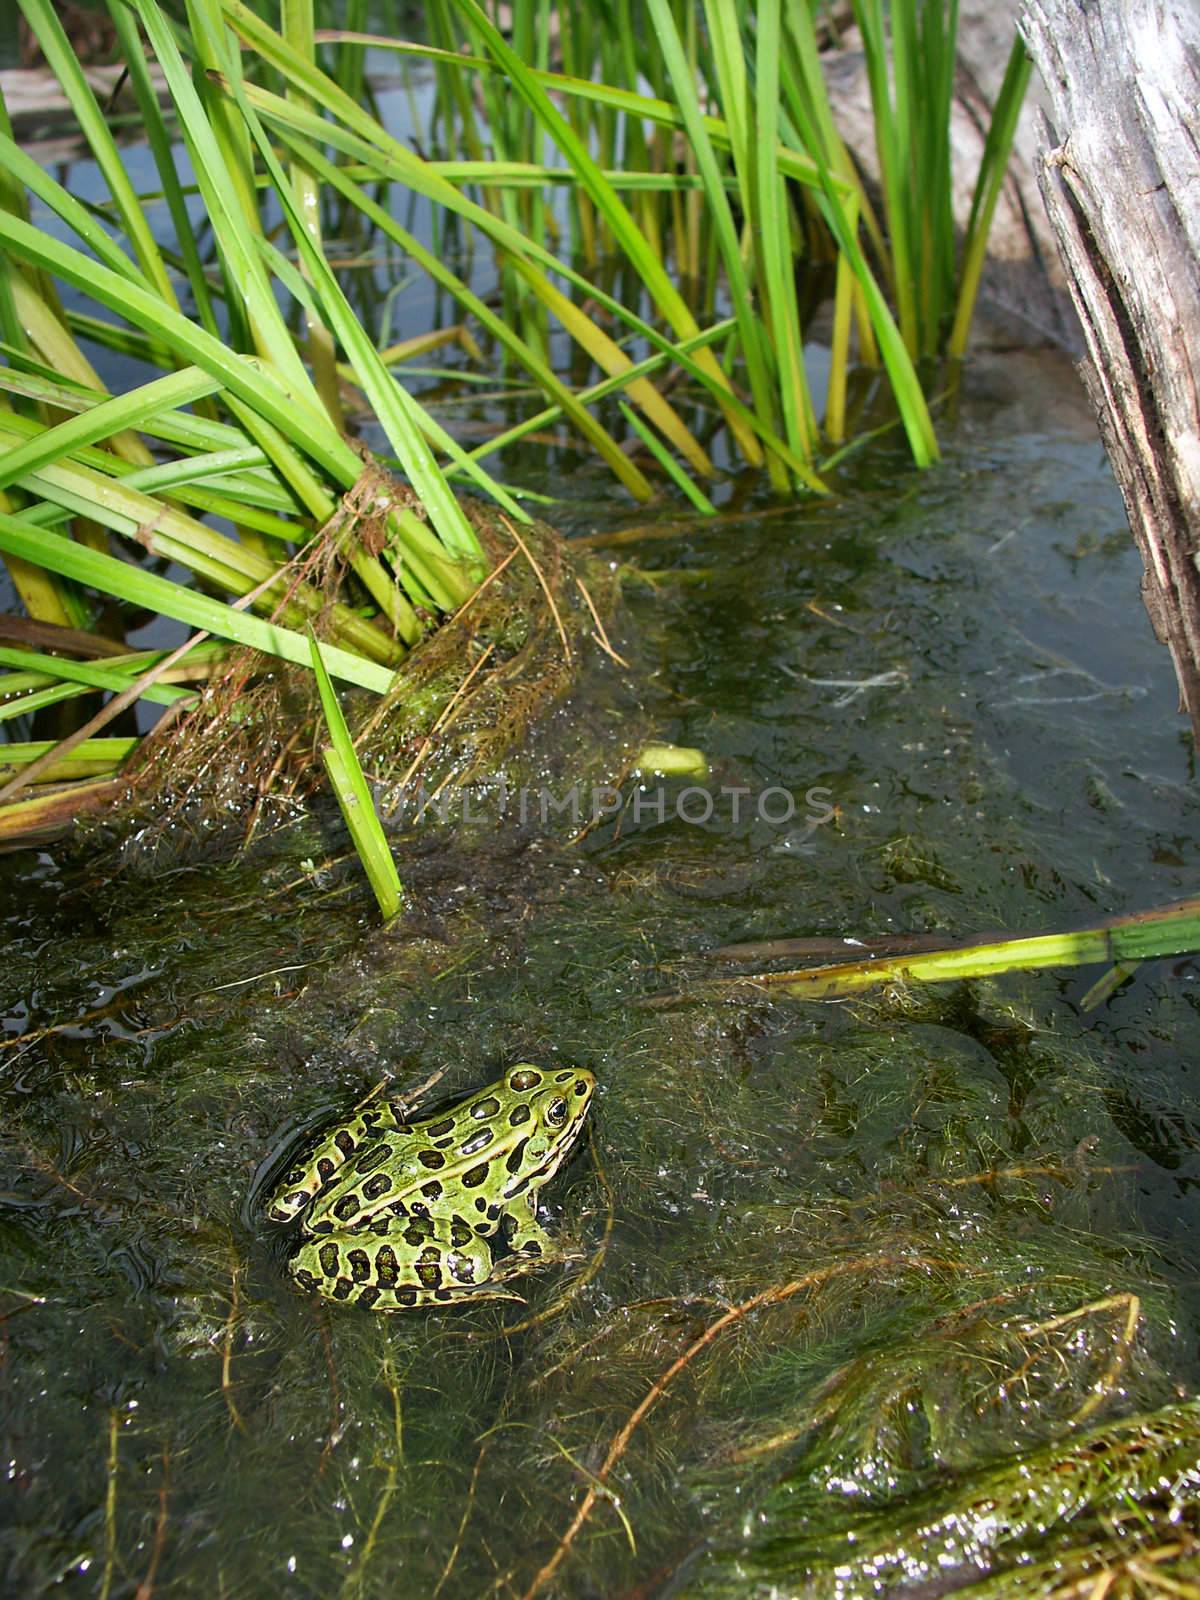 Northern Leopard Frog (Rana pipiens) at North Bass Lake in the northwoods of Wisconsin.